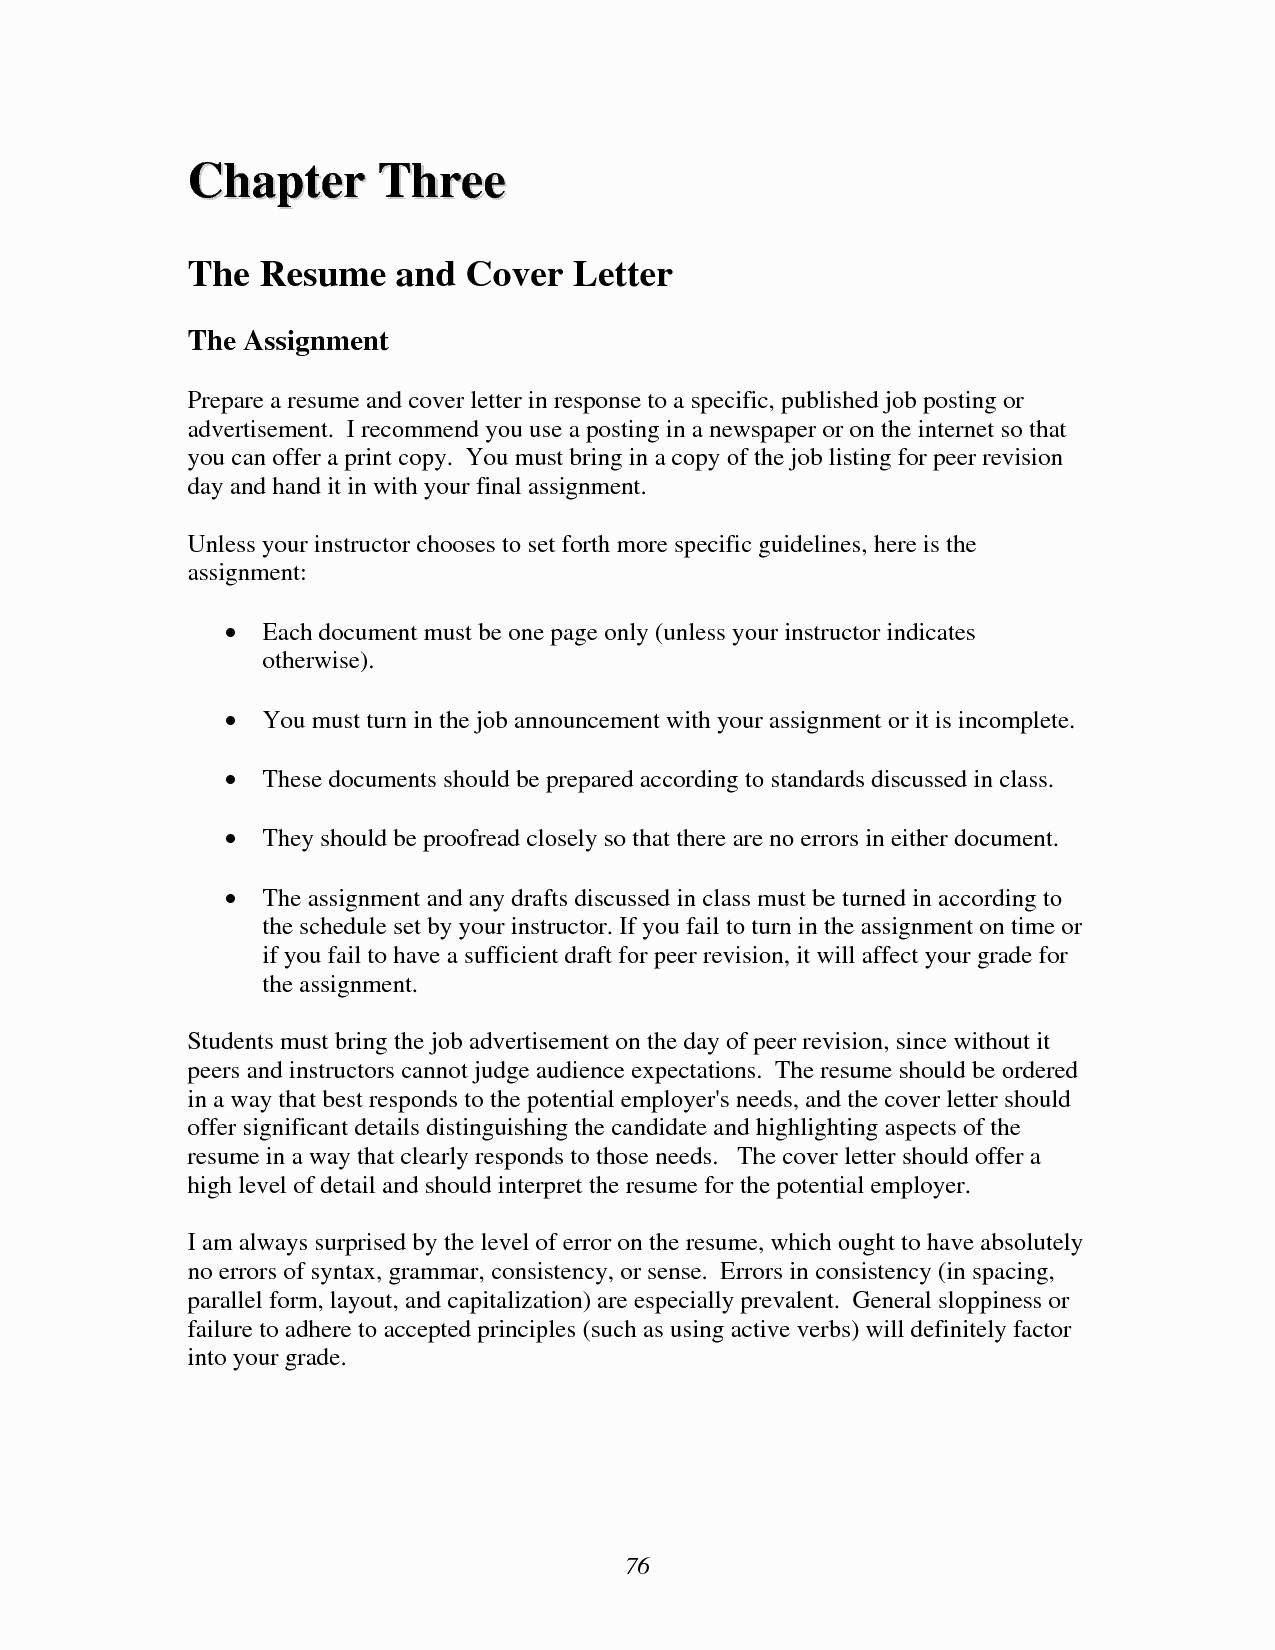 Free Letter Of Recommendation Template - Free Letter Re Mendation for A Job Fresh Job Fer Letter